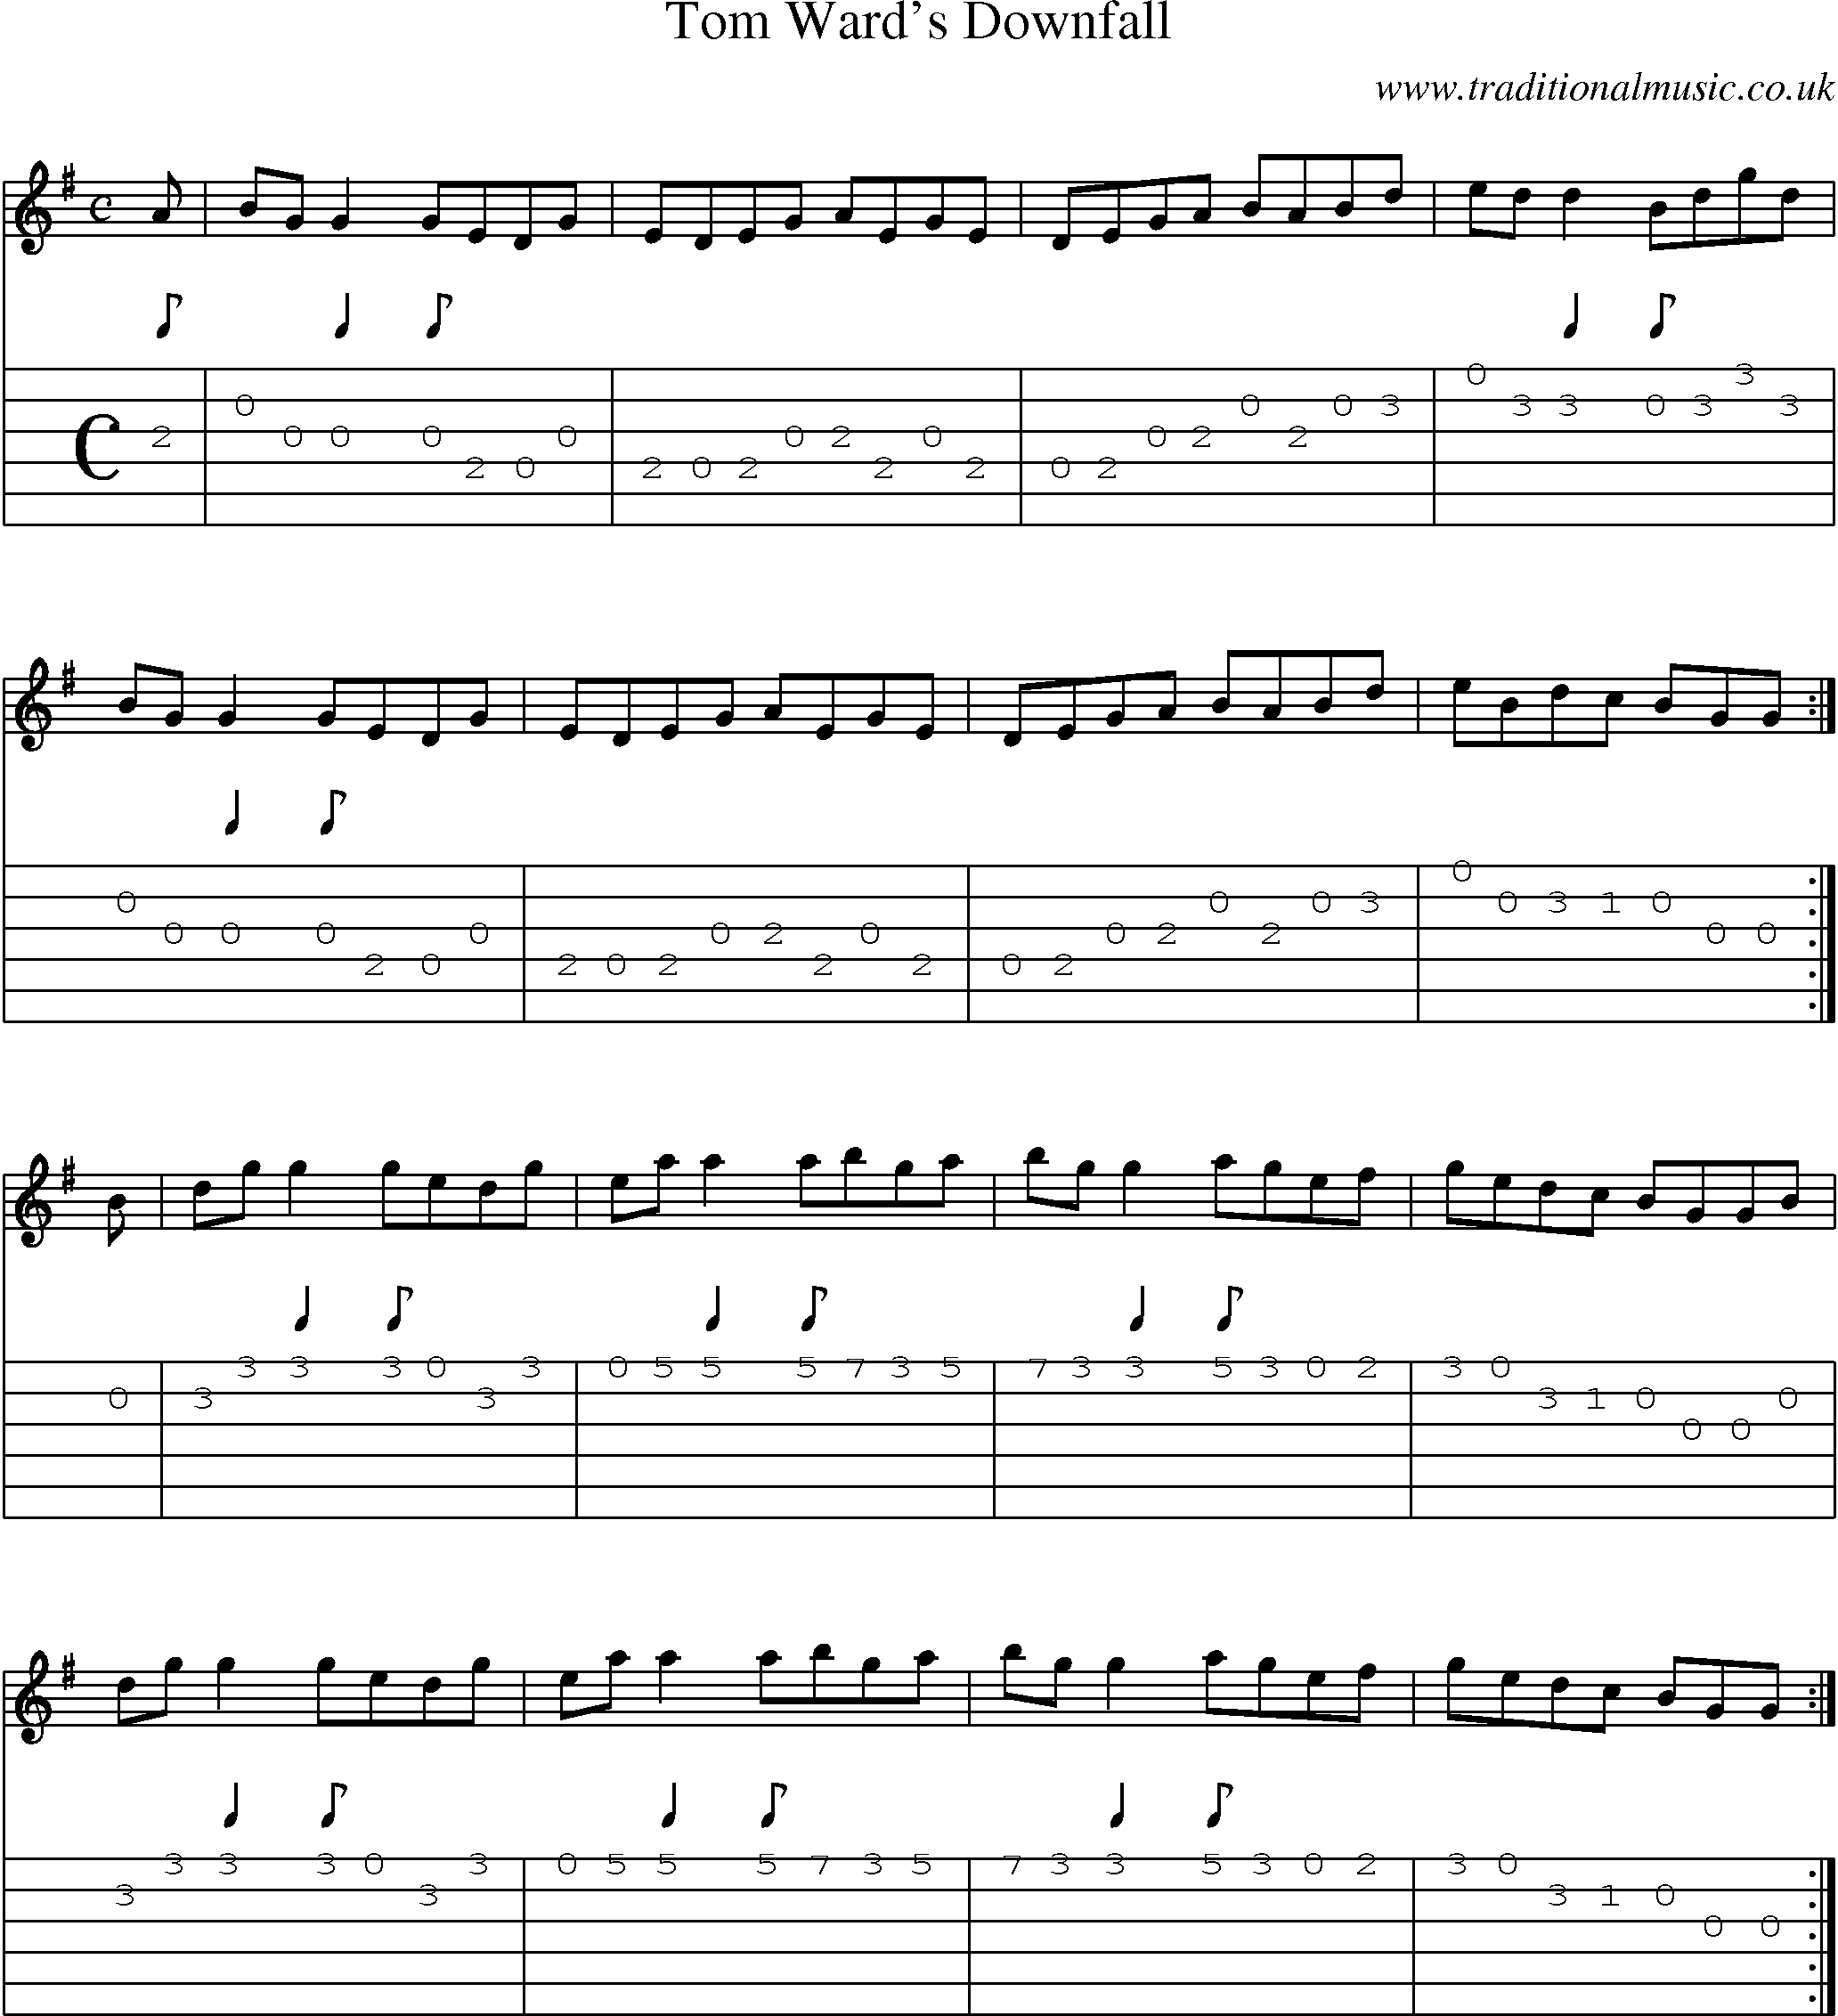 Music Score and Guitar Tabs for Tom Wards Downfall